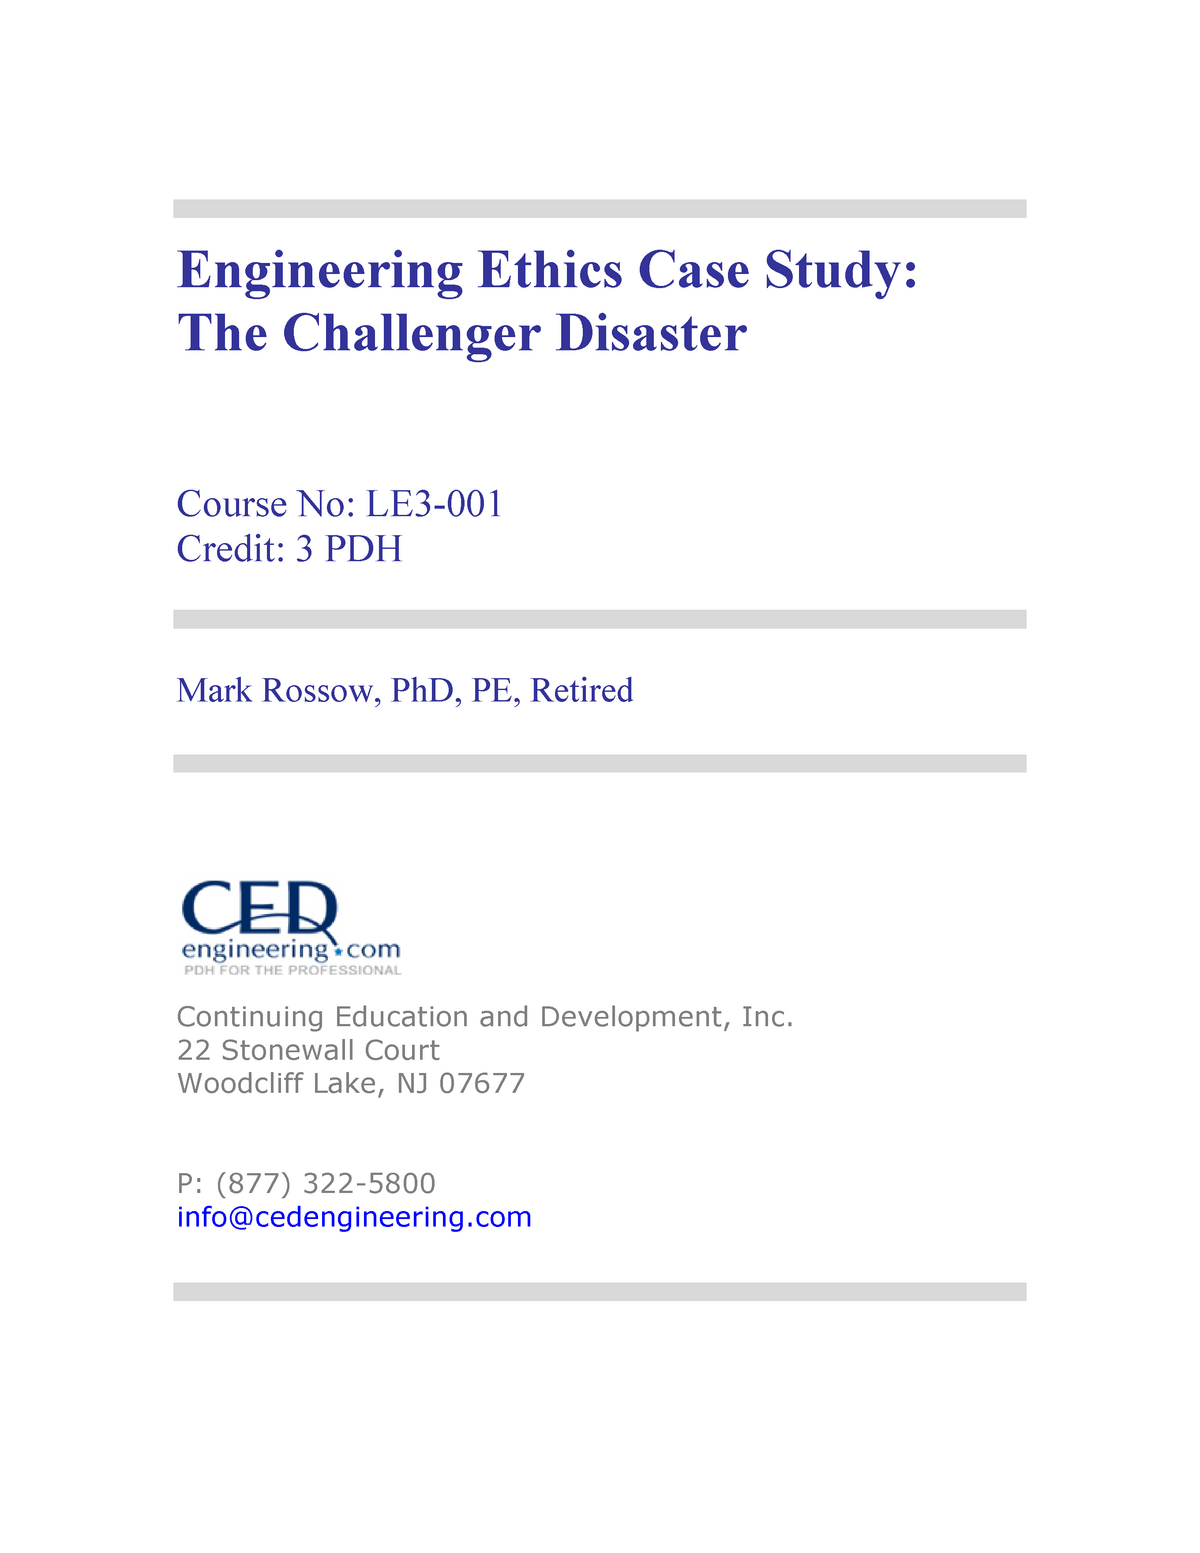 ethics case study disaster